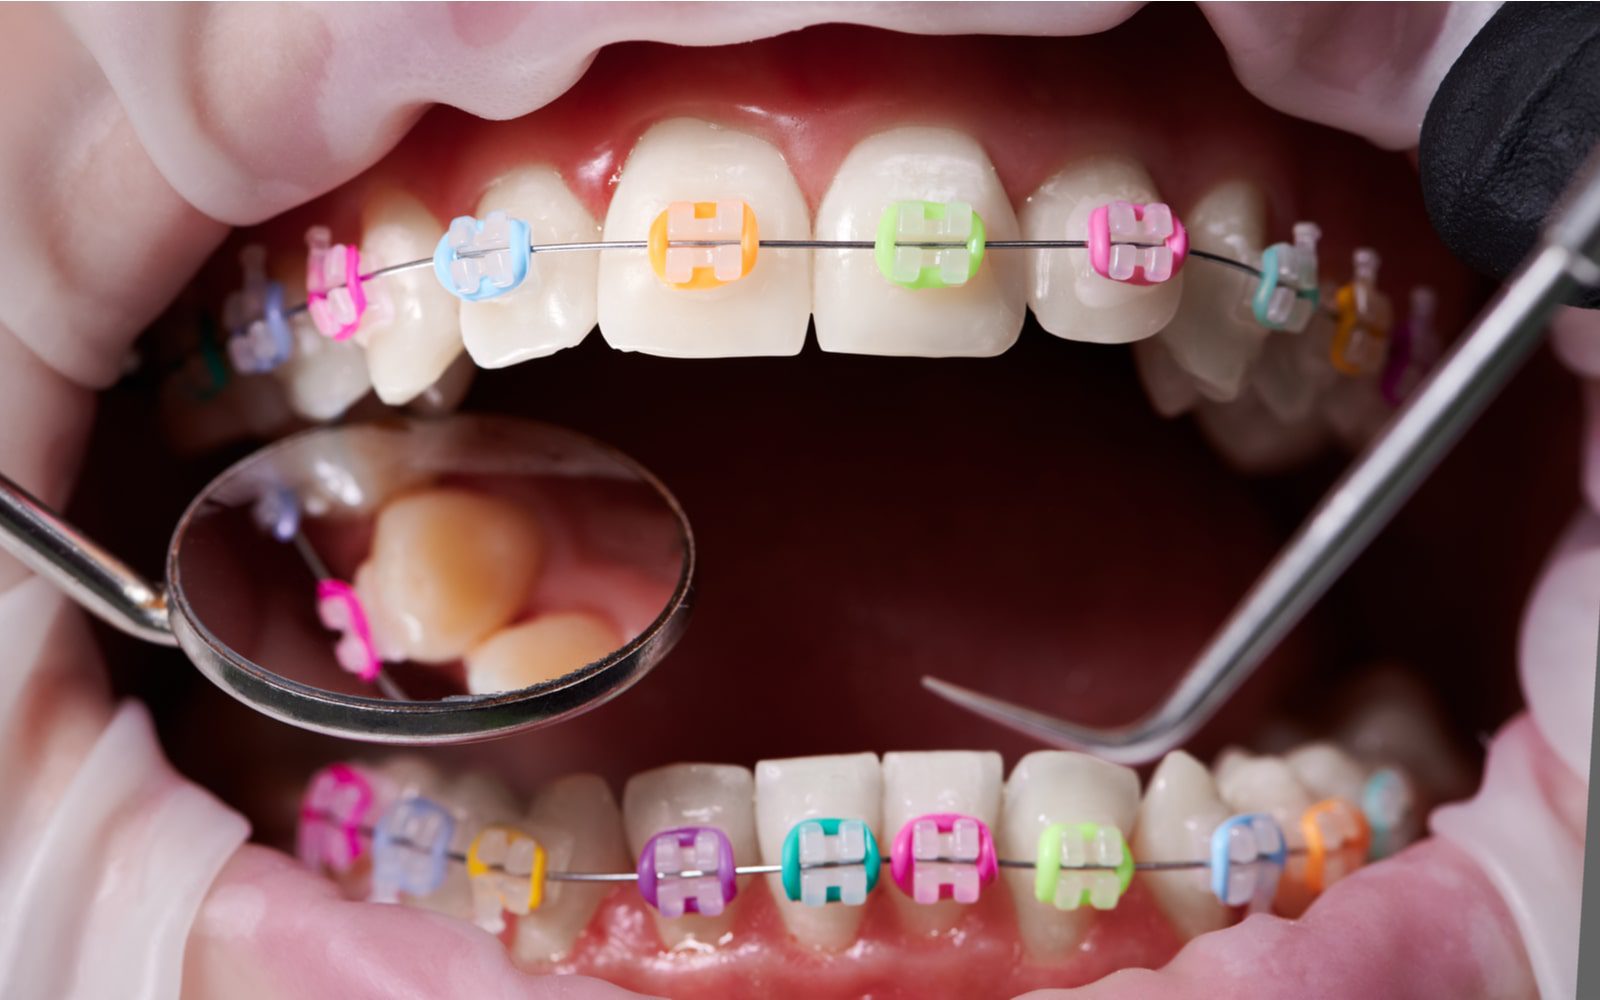 Colorful Braces During Checkup